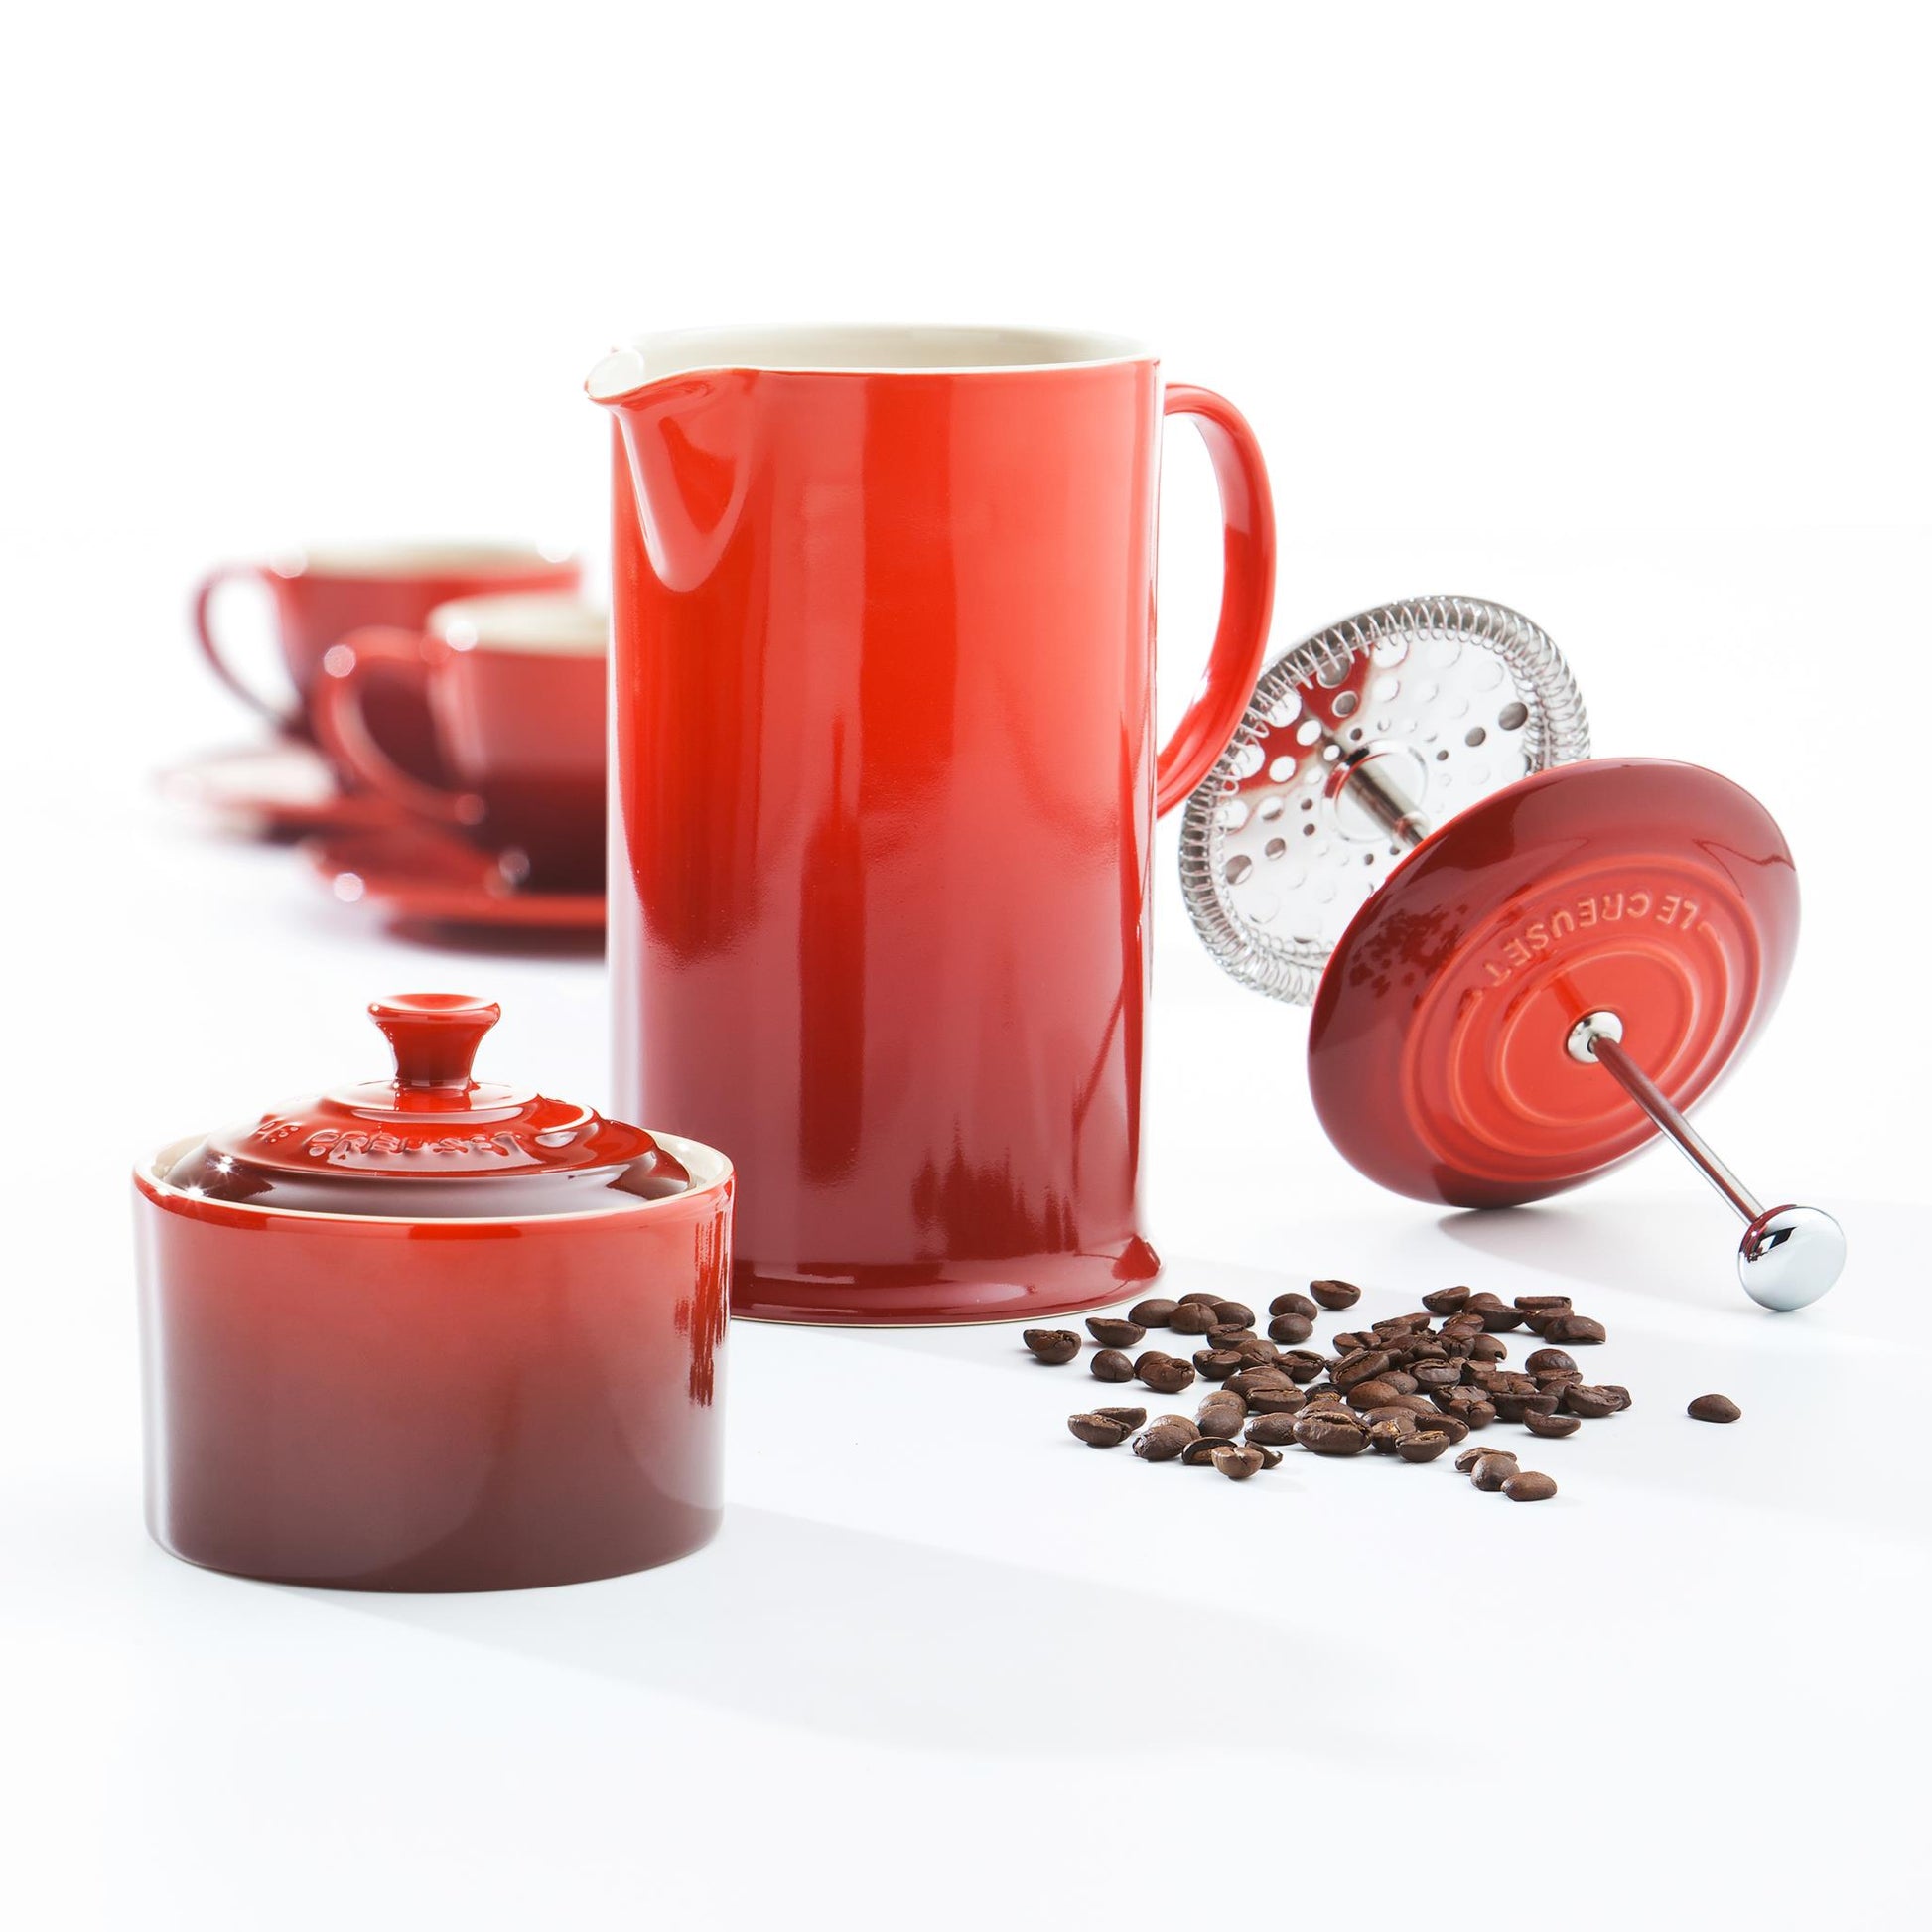 The cafetiere shown with some coffee beans, a ramekin and two cups and saucers